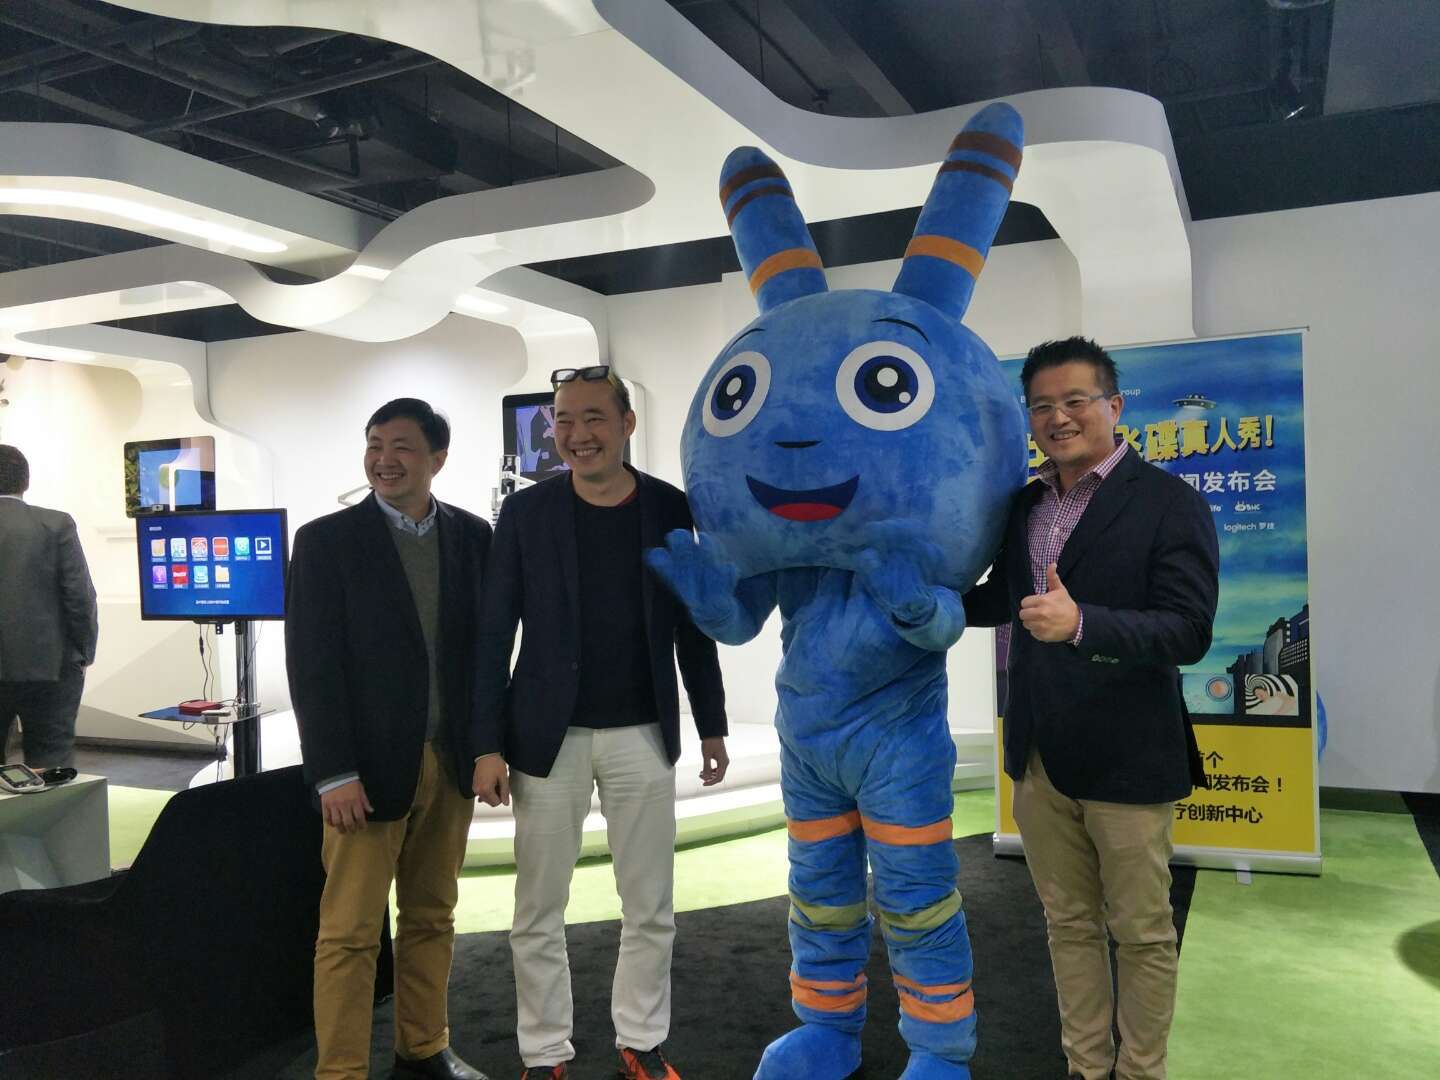 BHG Clinic IVF doctor specialists standing with blue chromosome character in the middle. From left to right: Dr Mun Yew Wong from Singapore, Dr Wei Siang Yu (founder and chairman of BHG Clinic), Dr Kenneth Leong from Melbourne, Australia